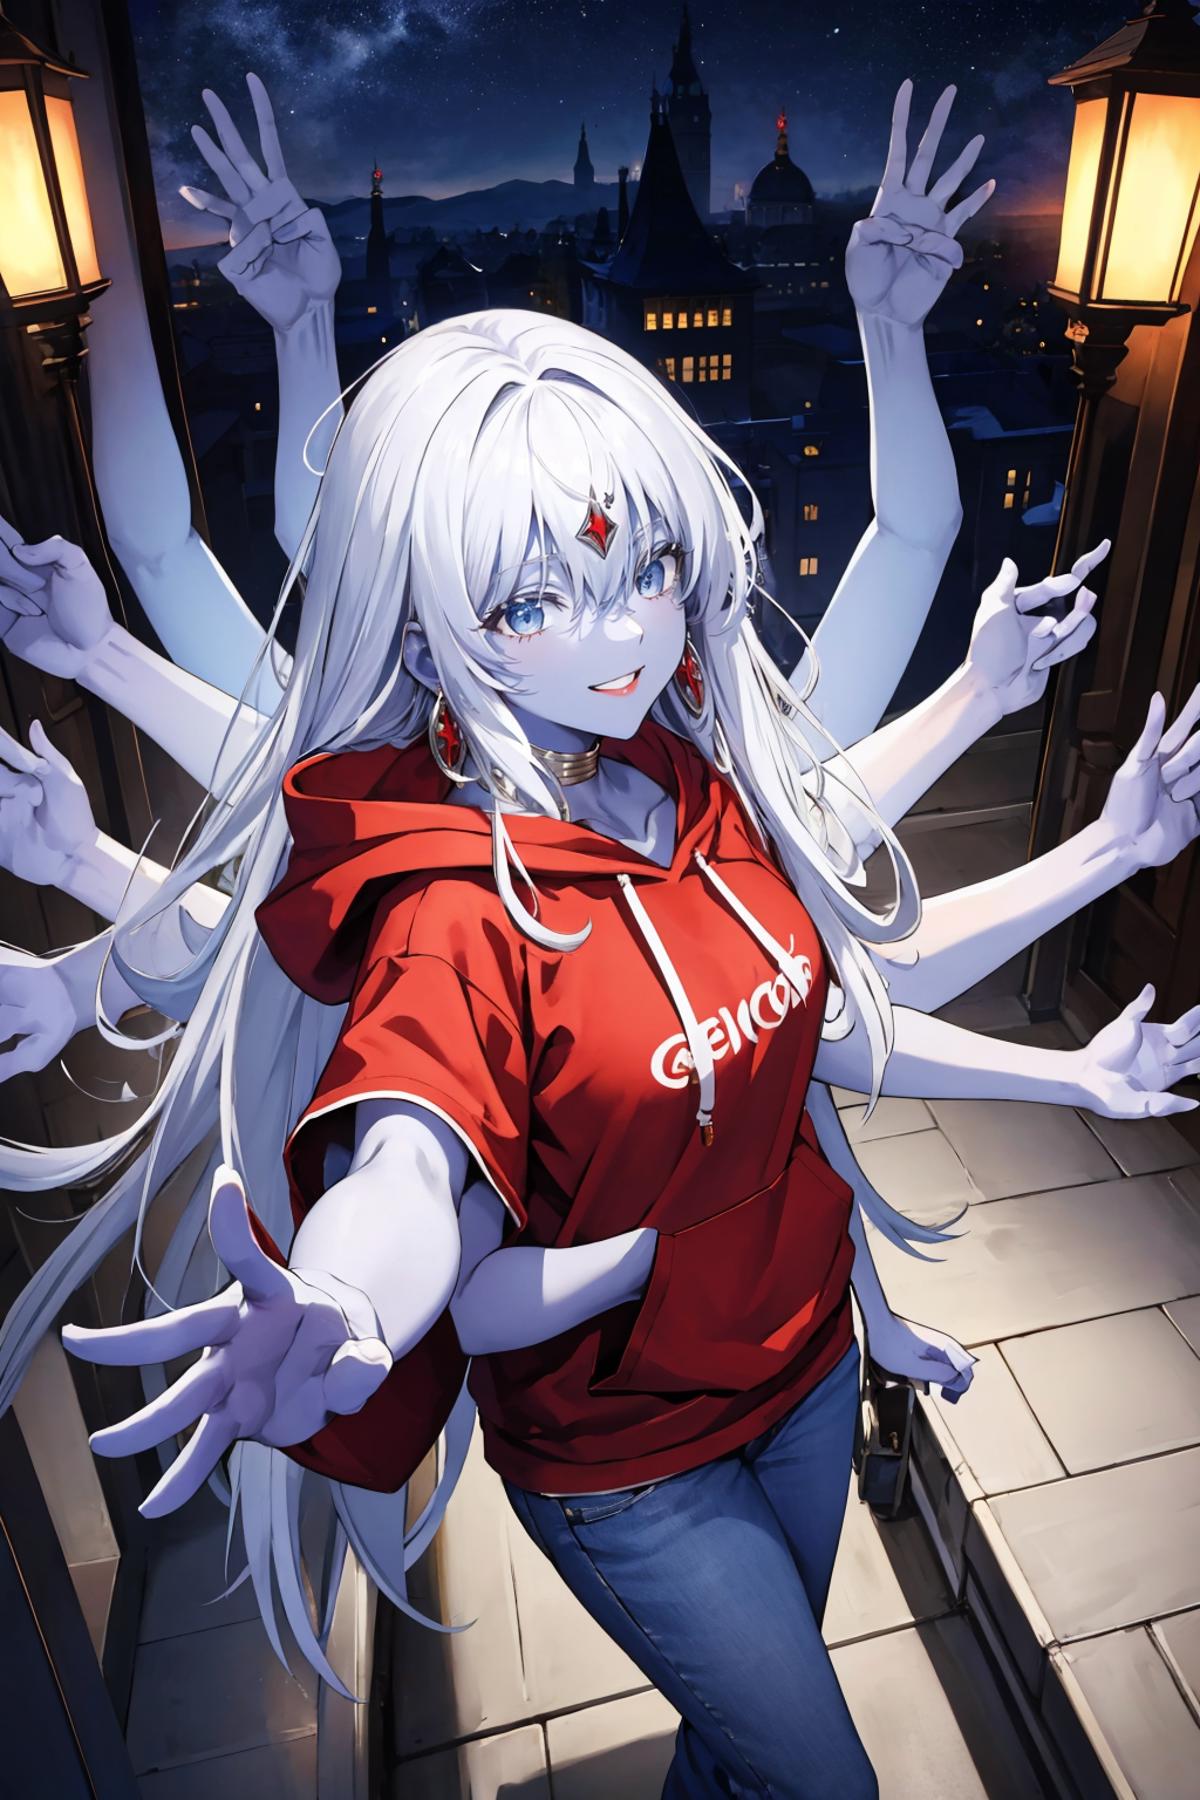 A young woman with long white hair, wearing a red hoodie, stands outdoors at night.